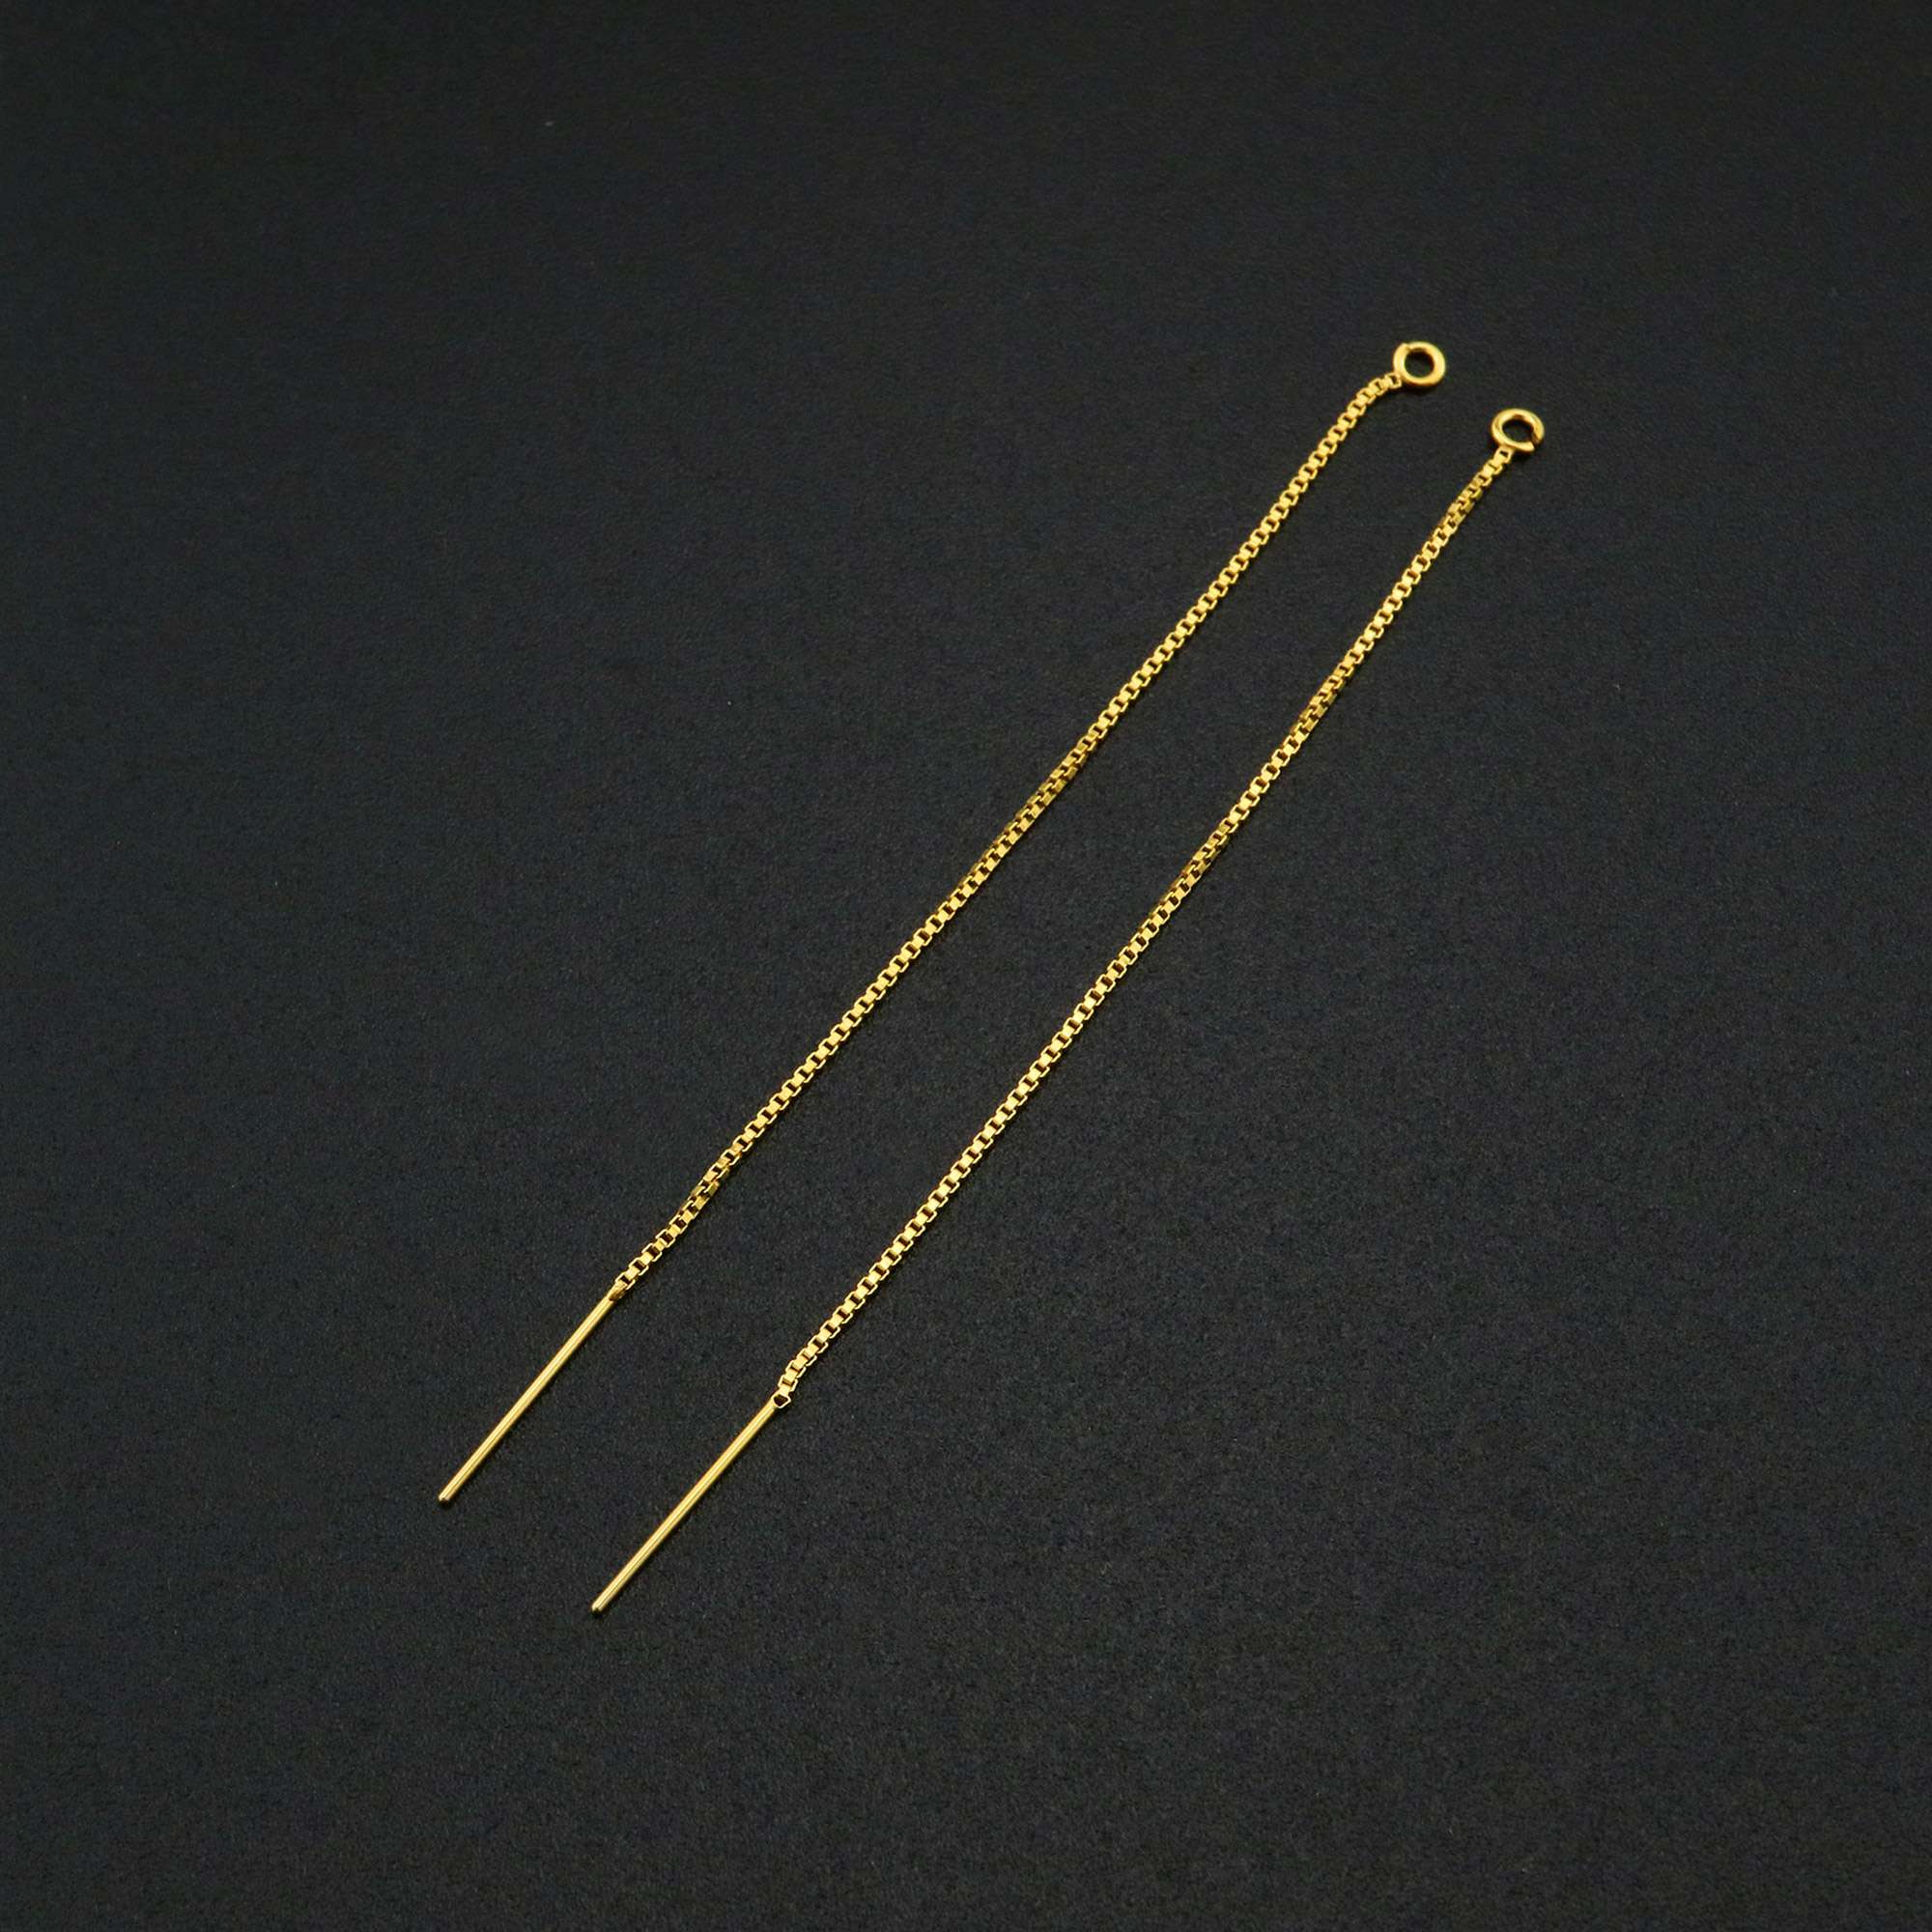 1Pair 14K Gold Filled Box Chain Wire Earrings with Open Loop DIY Supplies Findings for Beads 0.8MM Thick 80MM Long 1705069 - Click Image to Close